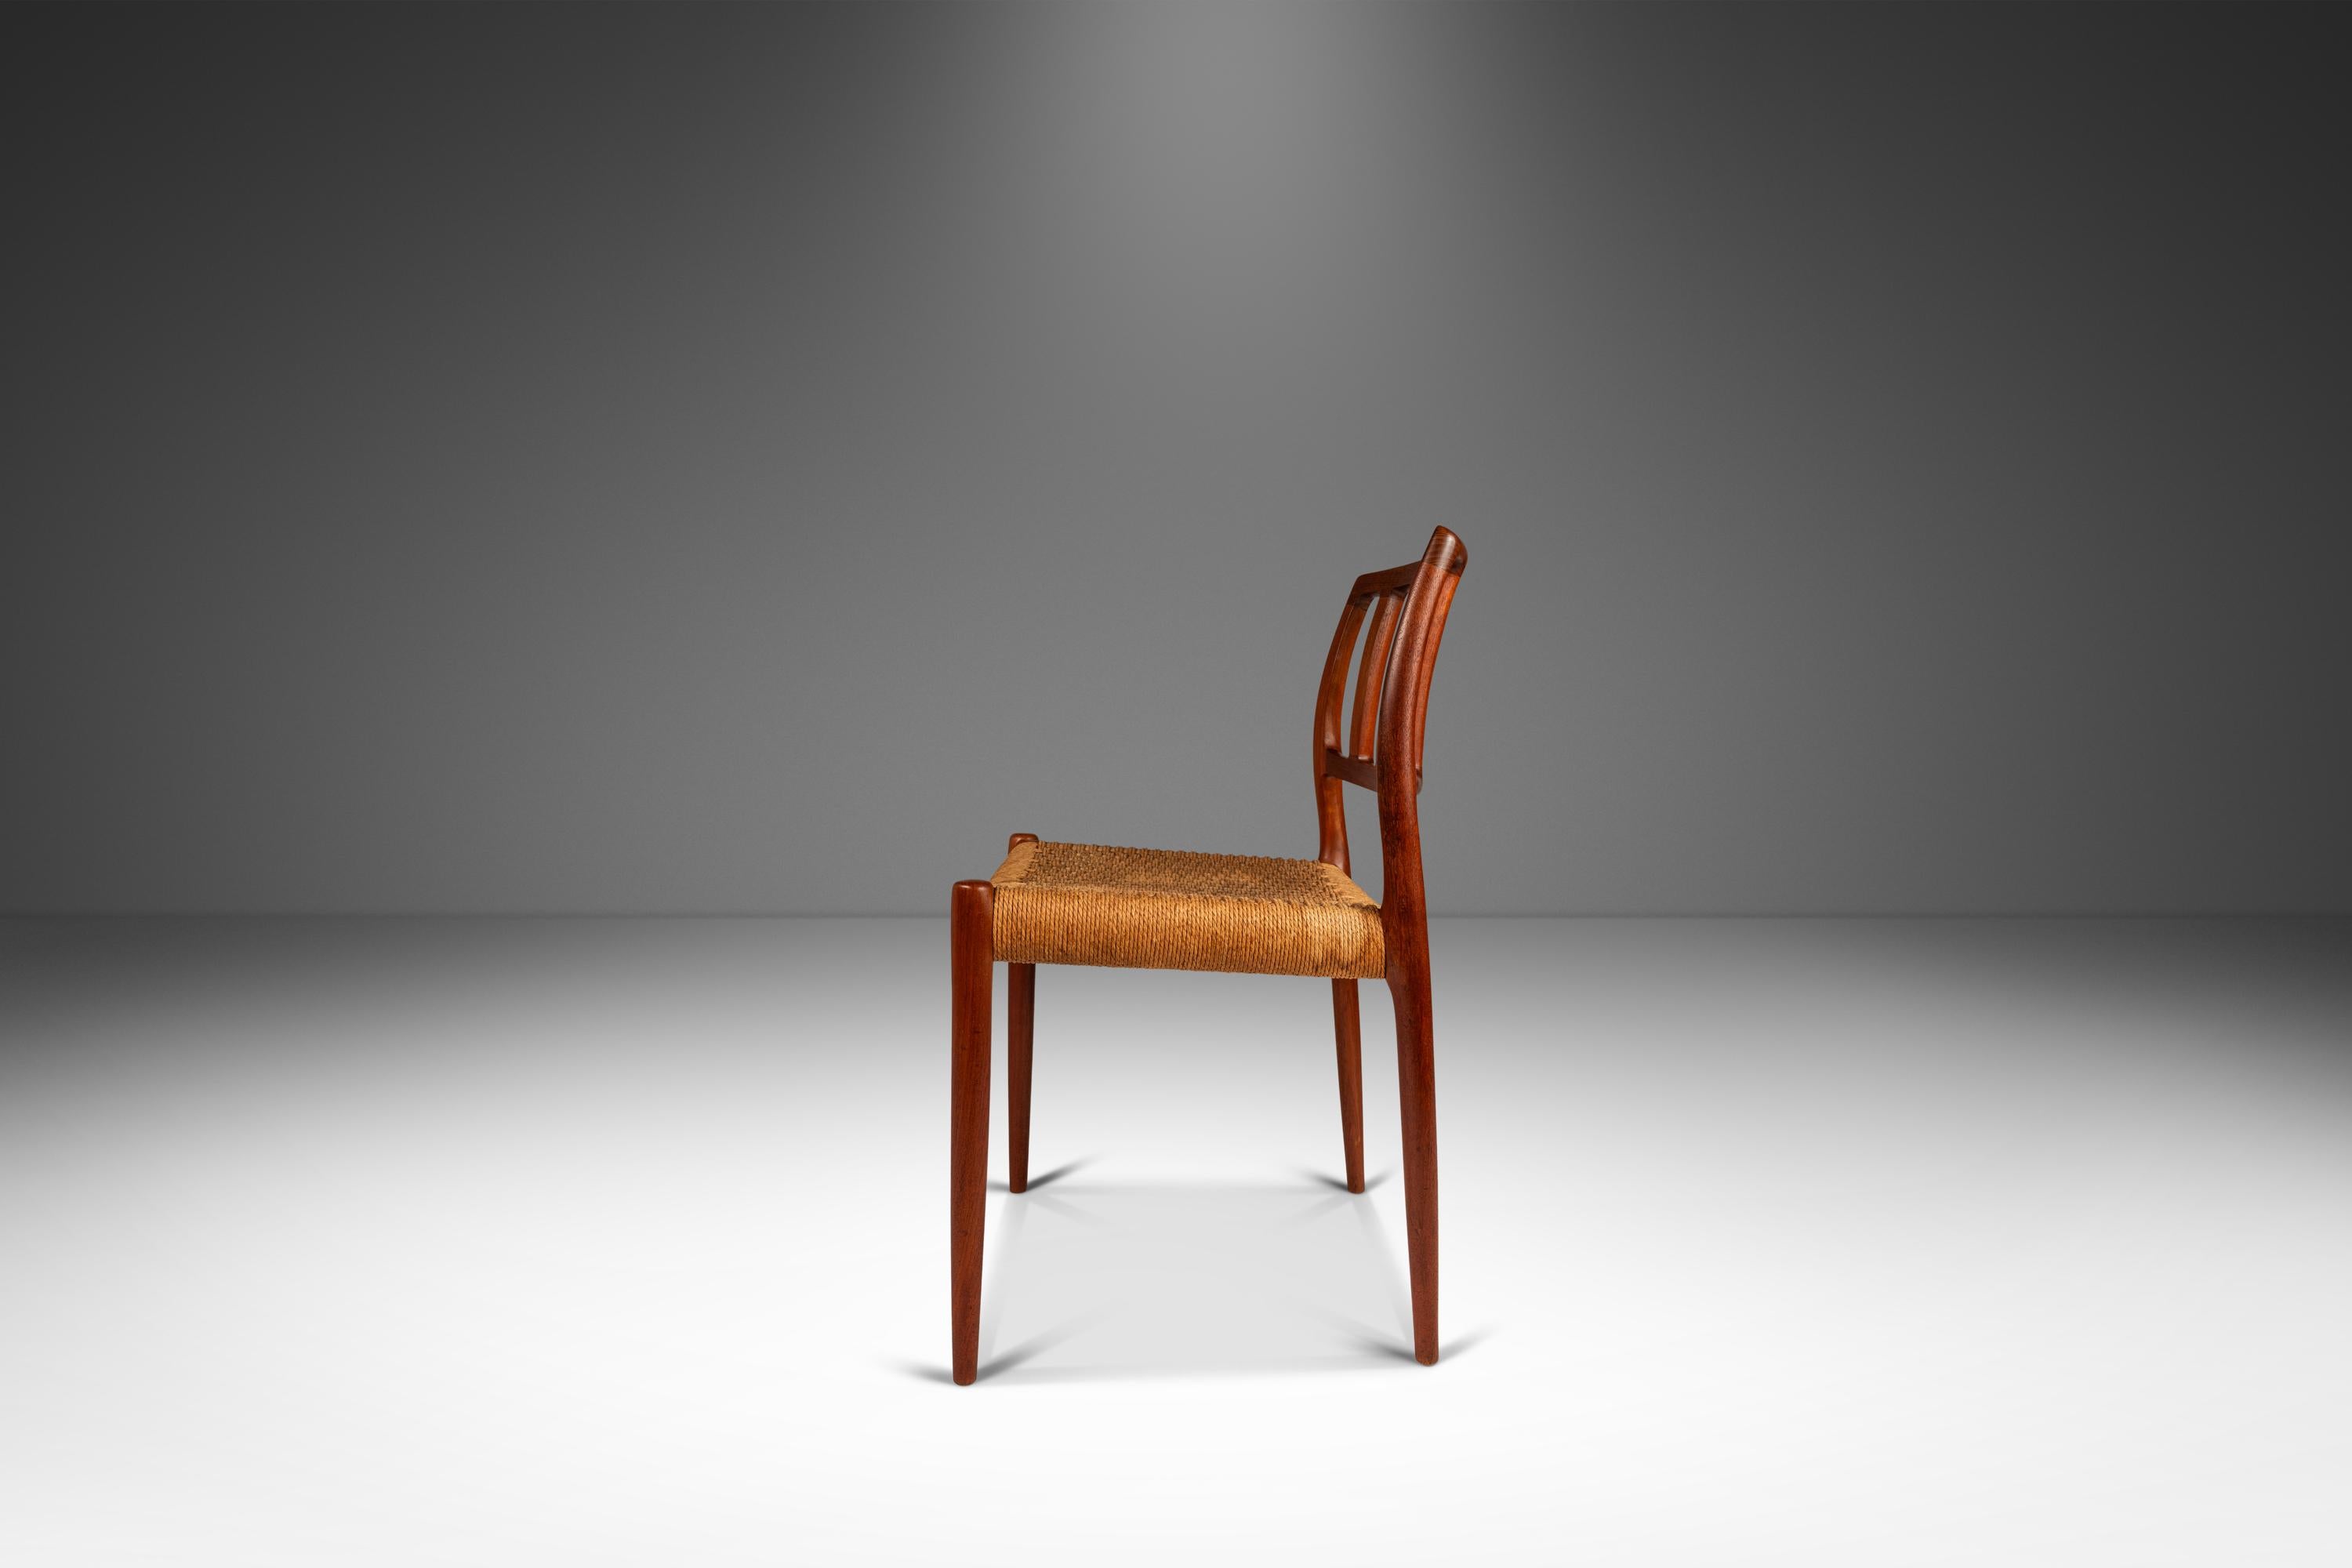 Introducing a rare Niels Otto Moller Model 83 side chair for J.L. Mollers Mobelfabrik, crafted in the 1960s in Denmark. This stunning chair is constructed from solid teak, showcasing the natural beauty of the woodgrain and unique coloration. The